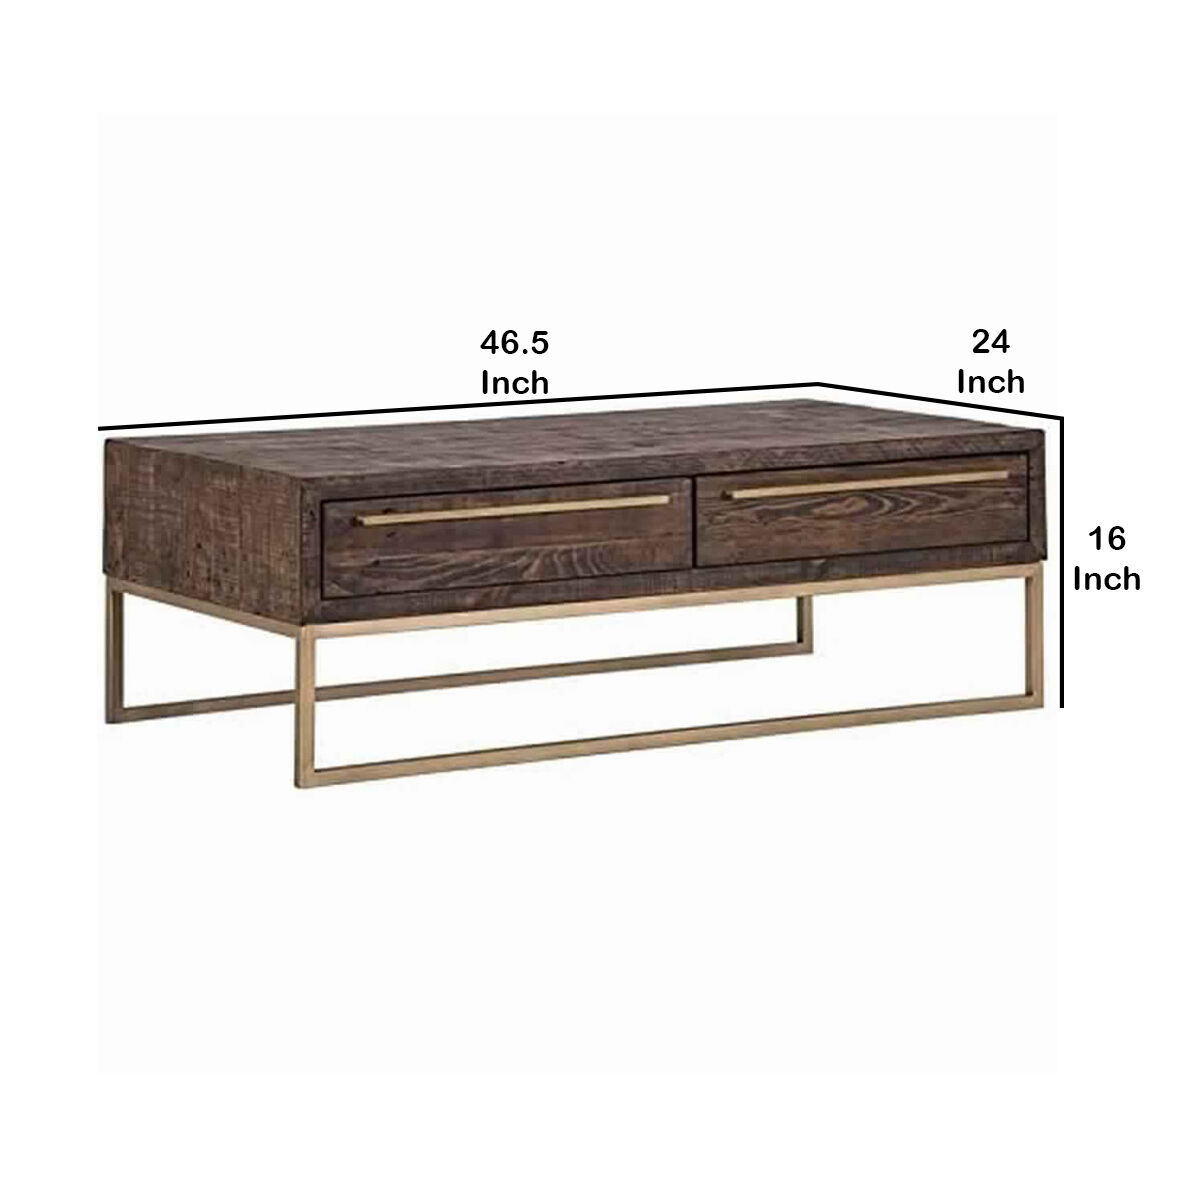 Wooden Coffee Table with 2 Storage Drawers and Metal Base, Brown and Gold